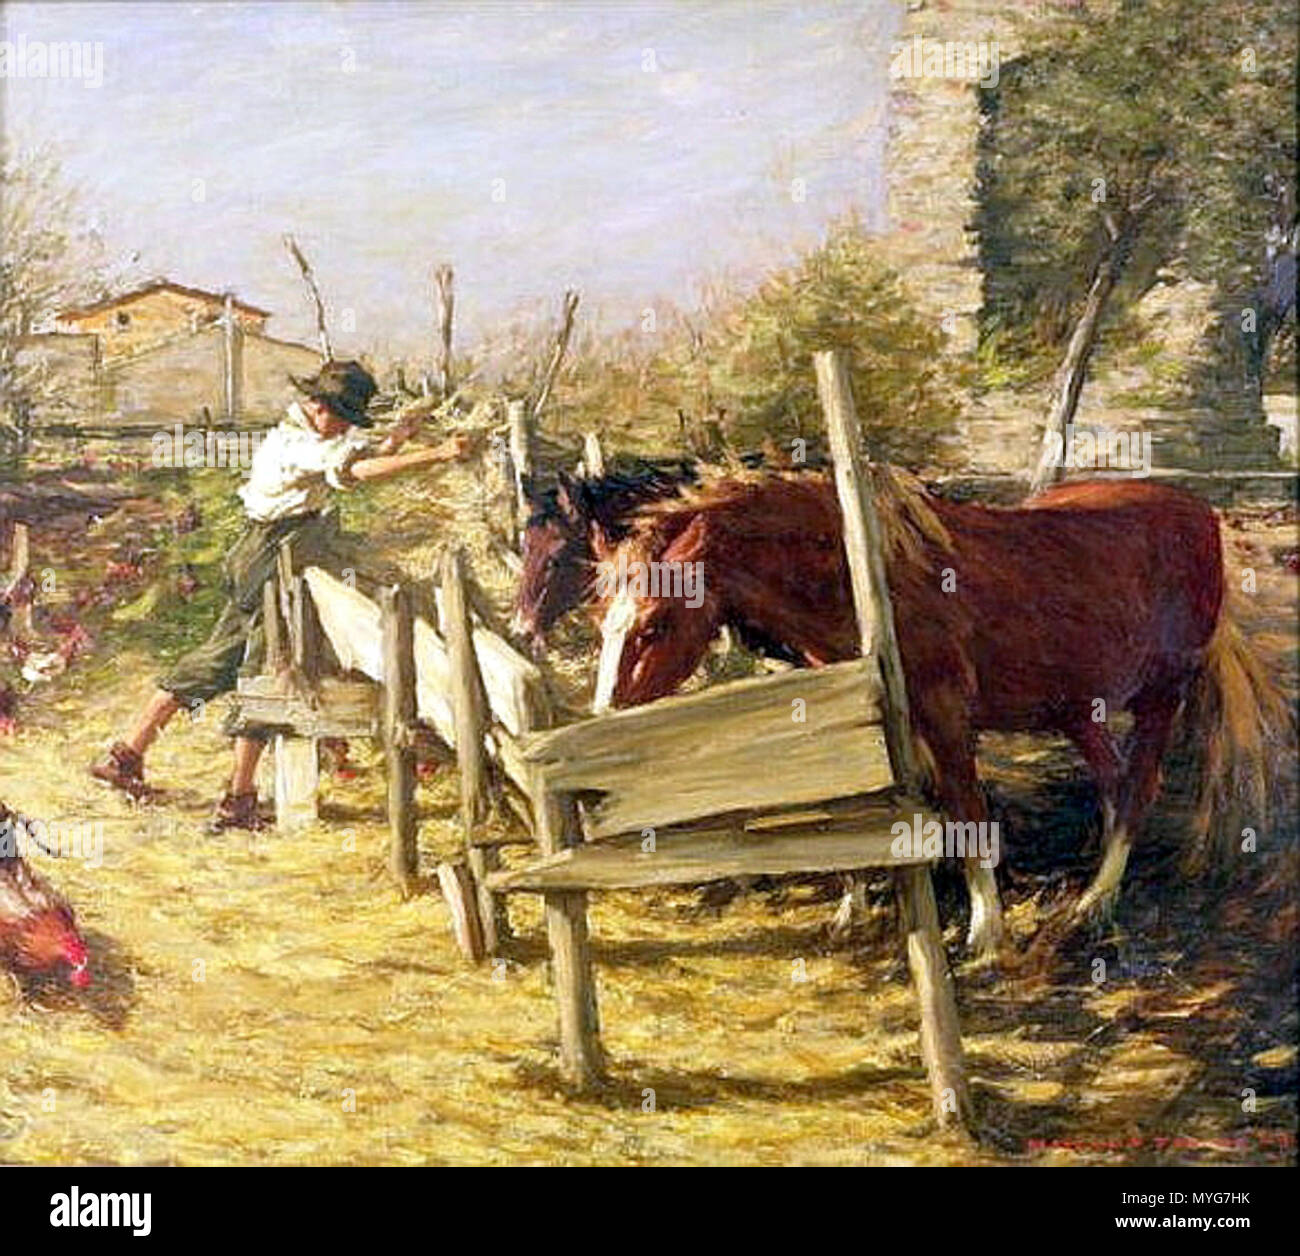 . The Appian Way . Unknown date.    Henry Herbert La Thangue  (1859–1929)     Alternative names Henry Herbert LaThangue; Henry La Thangue; Henry Herbert la Thangue; Henry Herbert Lathangue; La Thangue  Description English painter Realist painter and associated with the Newlyn School  Date of birth/death 19 September 1859 21 December 1929  Location of birth/death London London  Work location Bretagne, London, Category:Norfolk  Authority control  : Q1606851 VIAF: 25469415 ISNI: 0000 0000 6681 1384 ULAN: 500004645 LCCN: n89654016 WGA: LA THANGUE, Henry Herbert WorldCat 236 Henry Herbert La Thangu Stock Photo